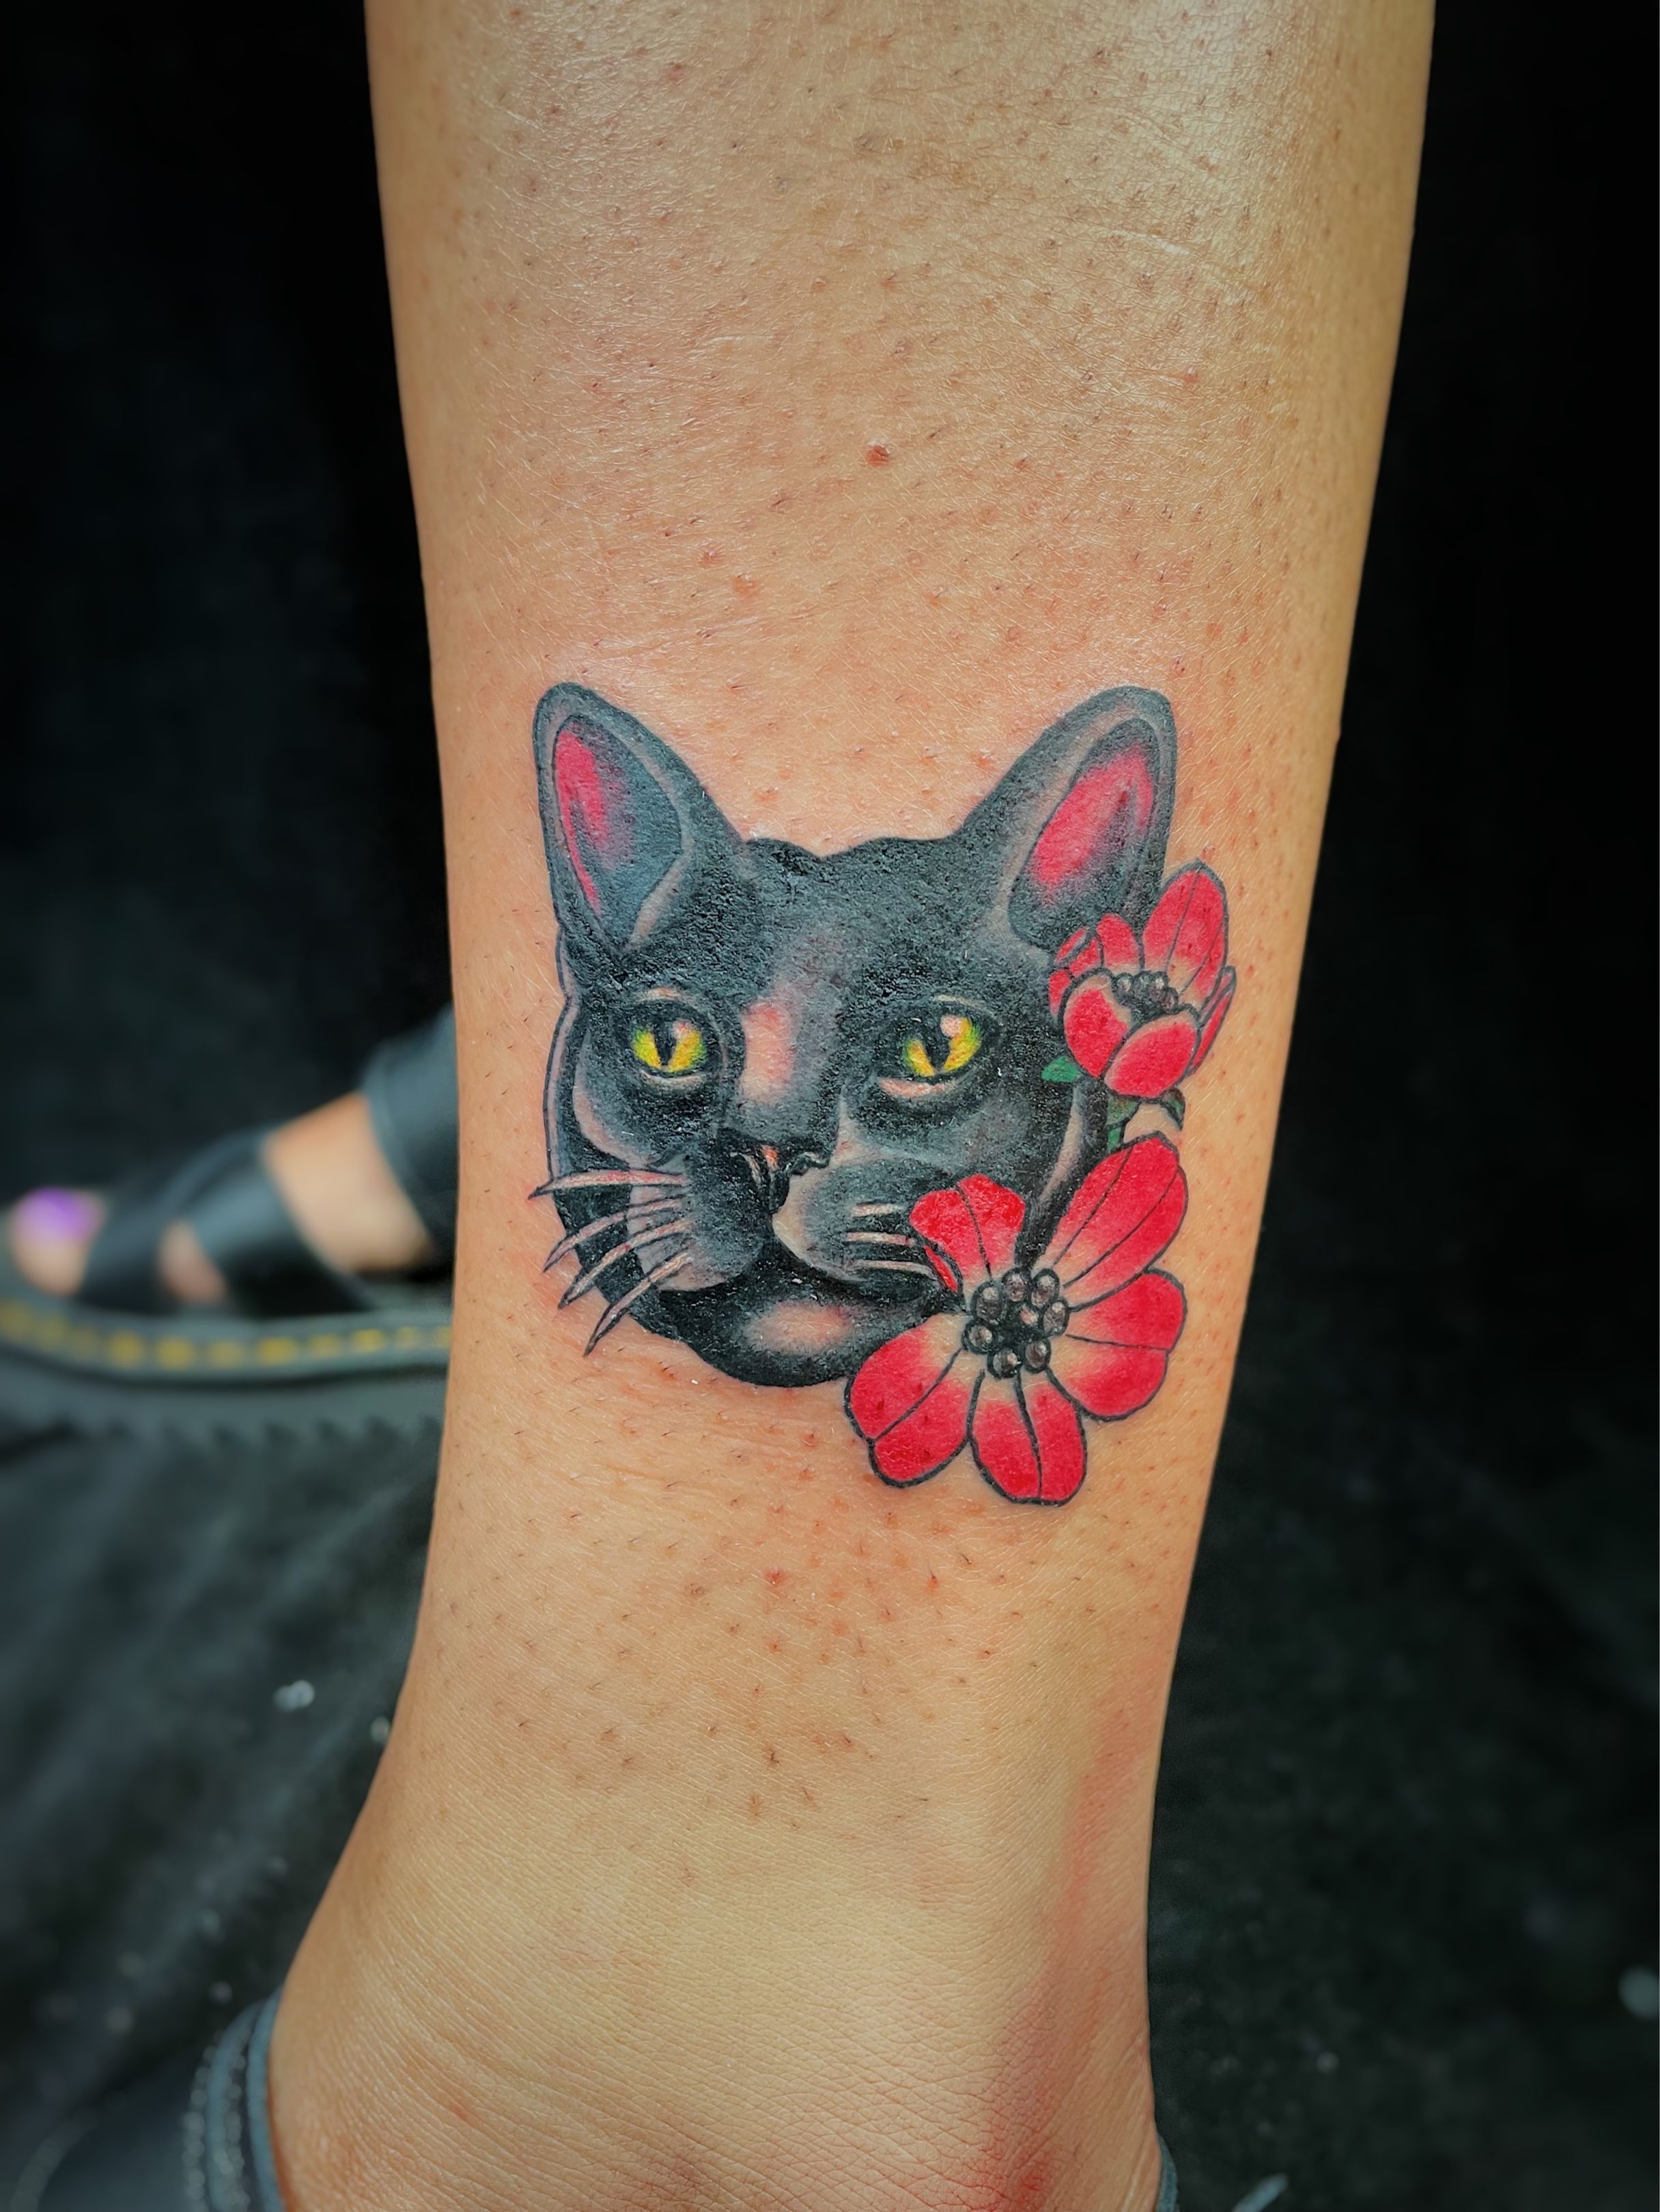 Tattoo uploaded by Sam Sparkes  Cat tattoo on forearm done by Dom Drake at  All Electric Tattoo Company  Tattoodo